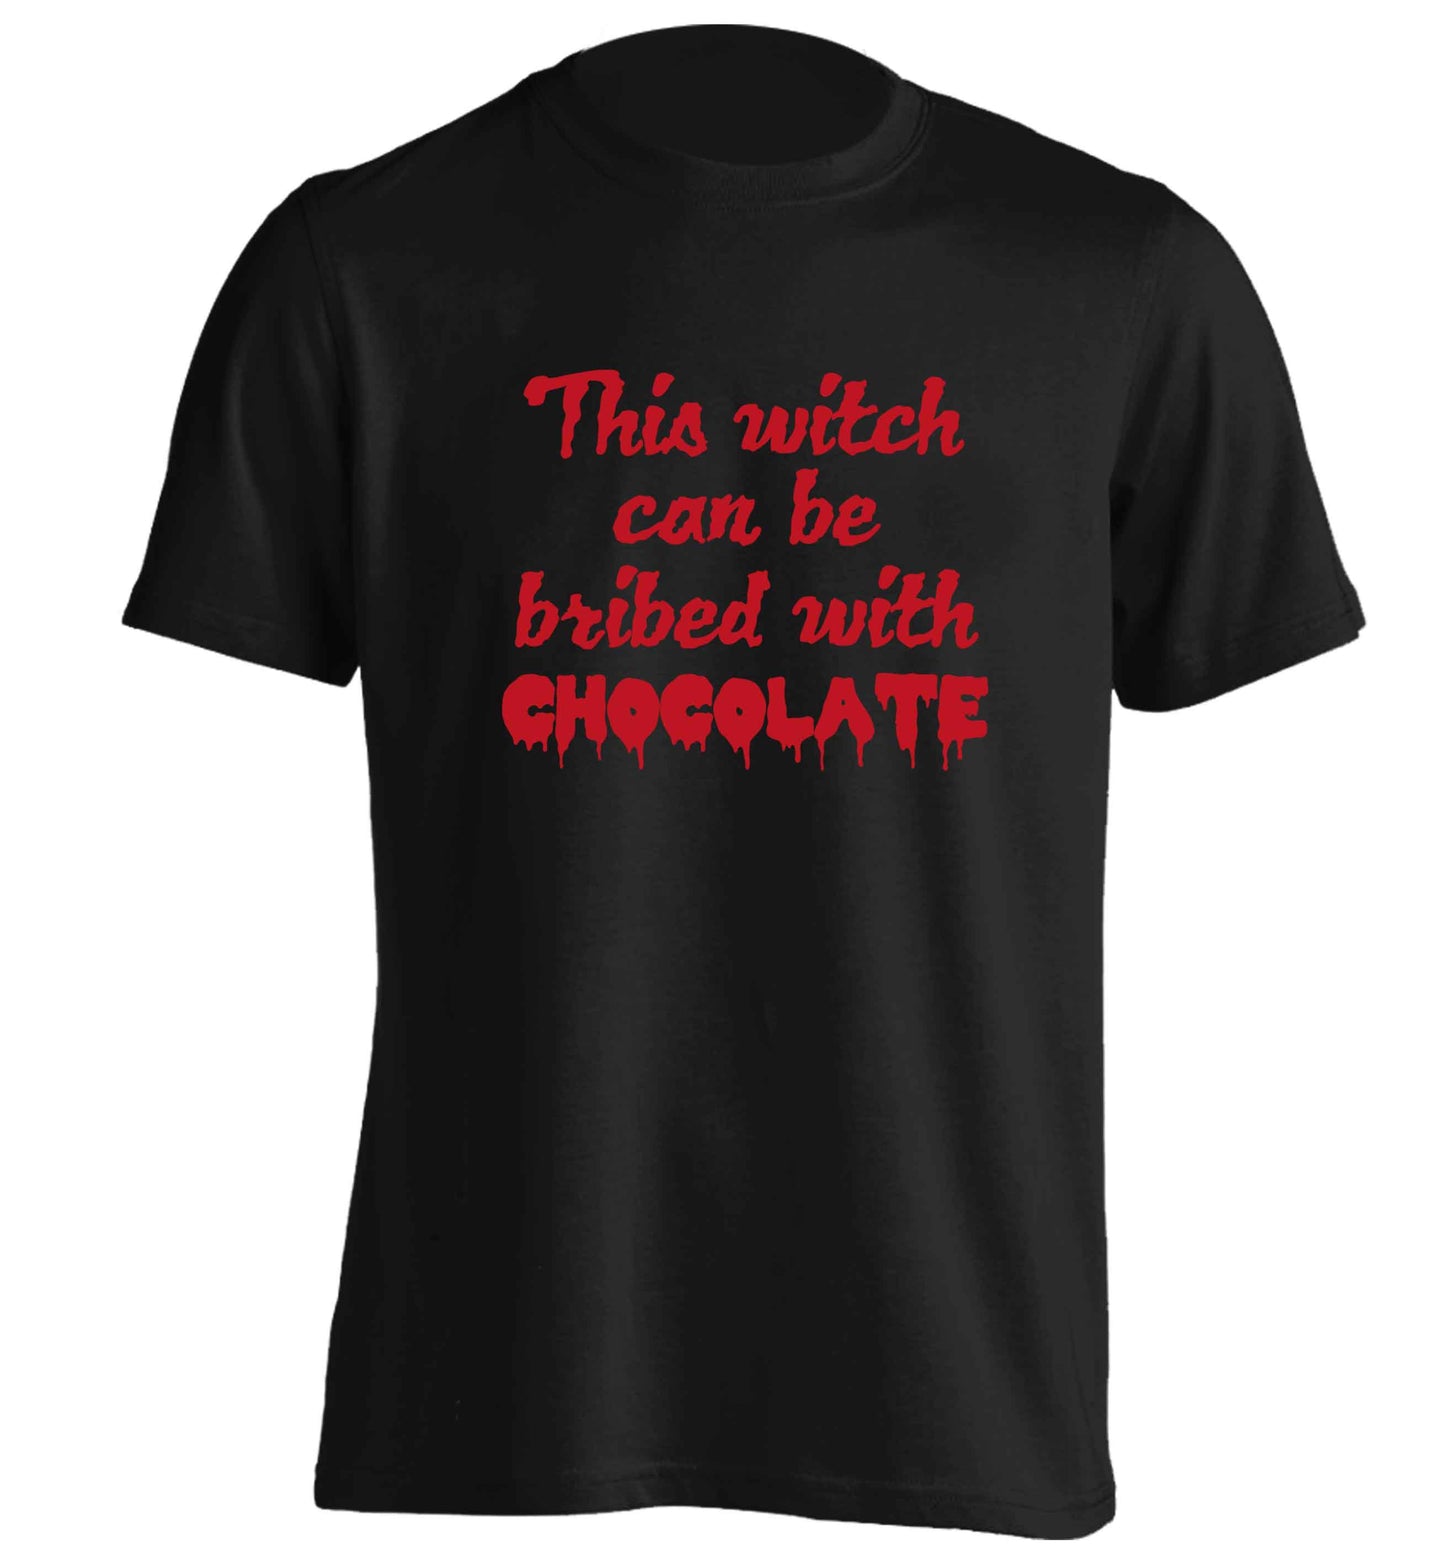 This witch can be bribed with chocolate adults unisex black Tshirt 2XL